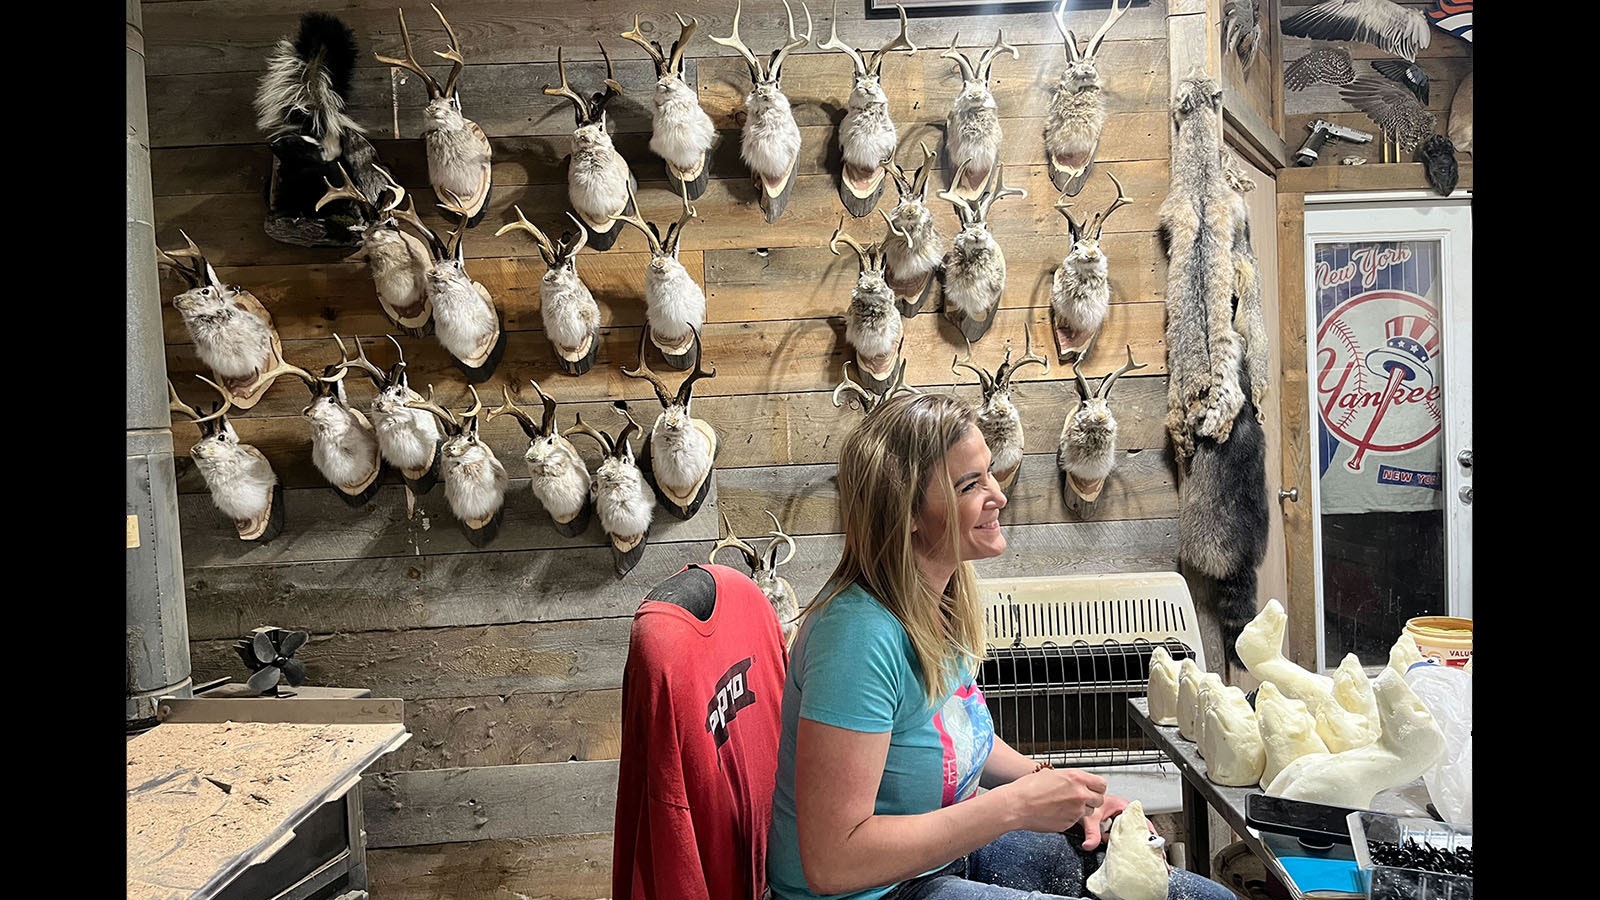 Grace Herrick married into the family business of making jackalopes.